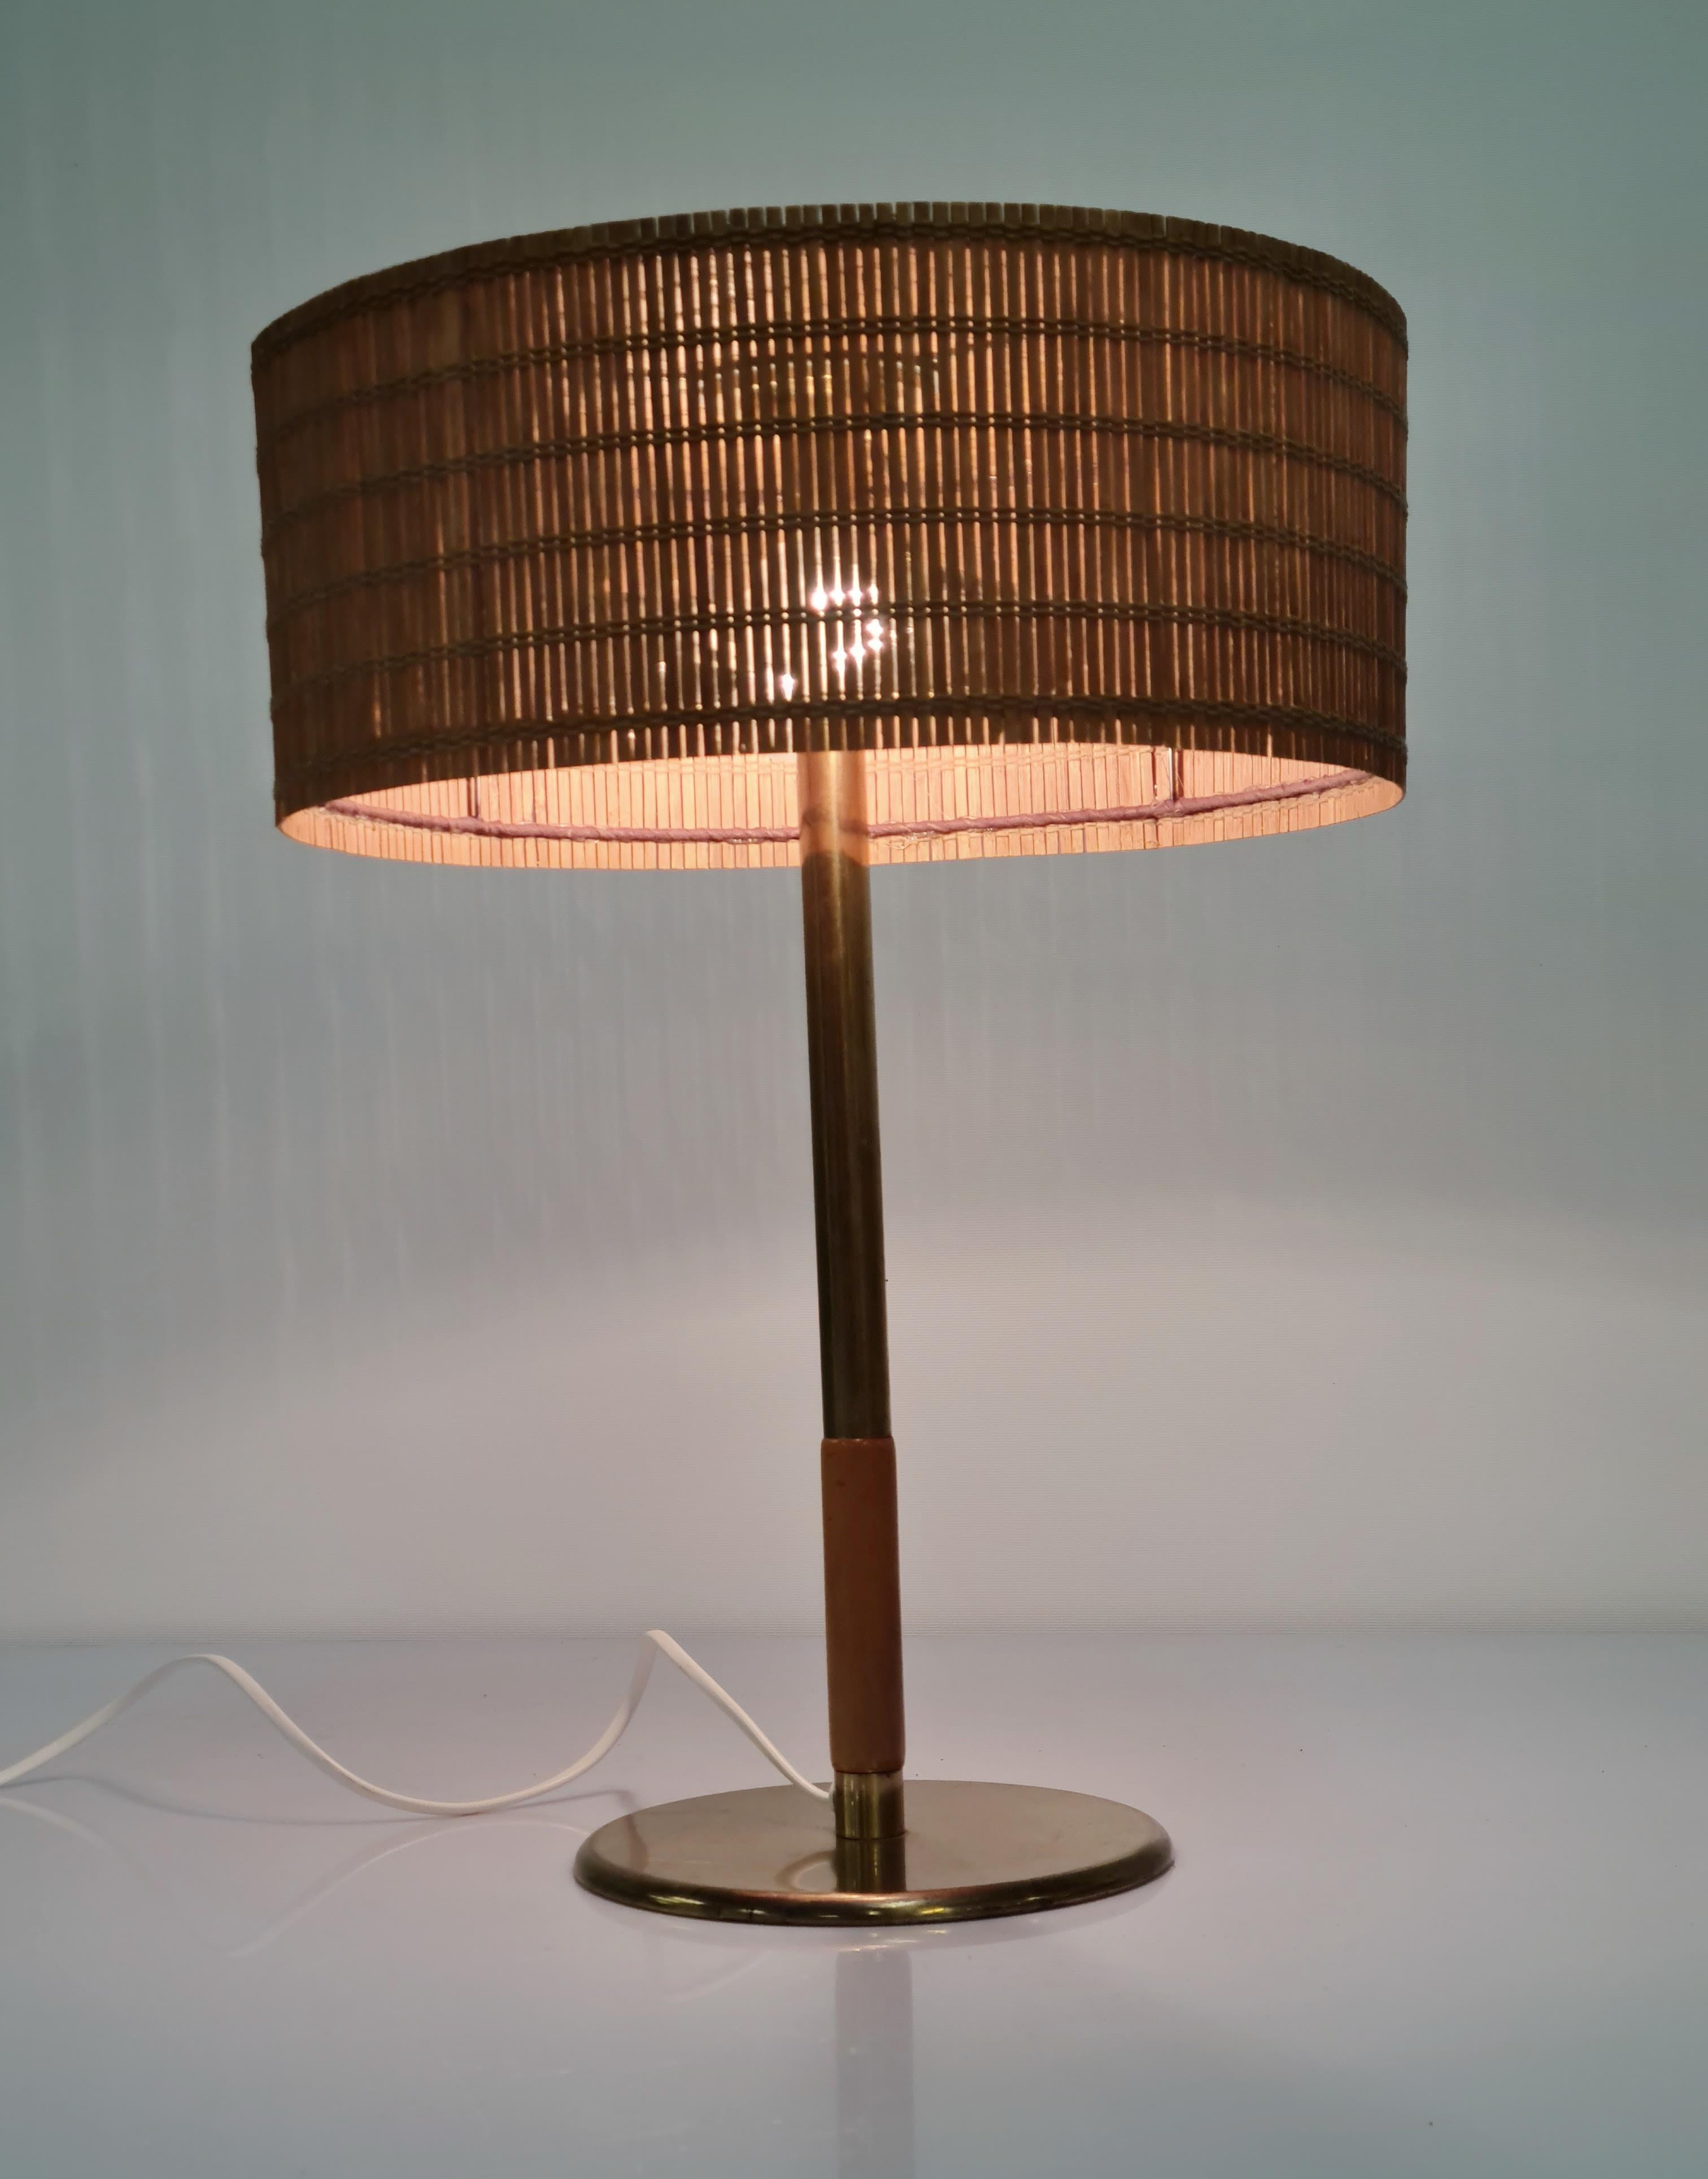 Scandinavian Modern Paavo Tynell Table Lamp Model 5068, Taito  For Sale